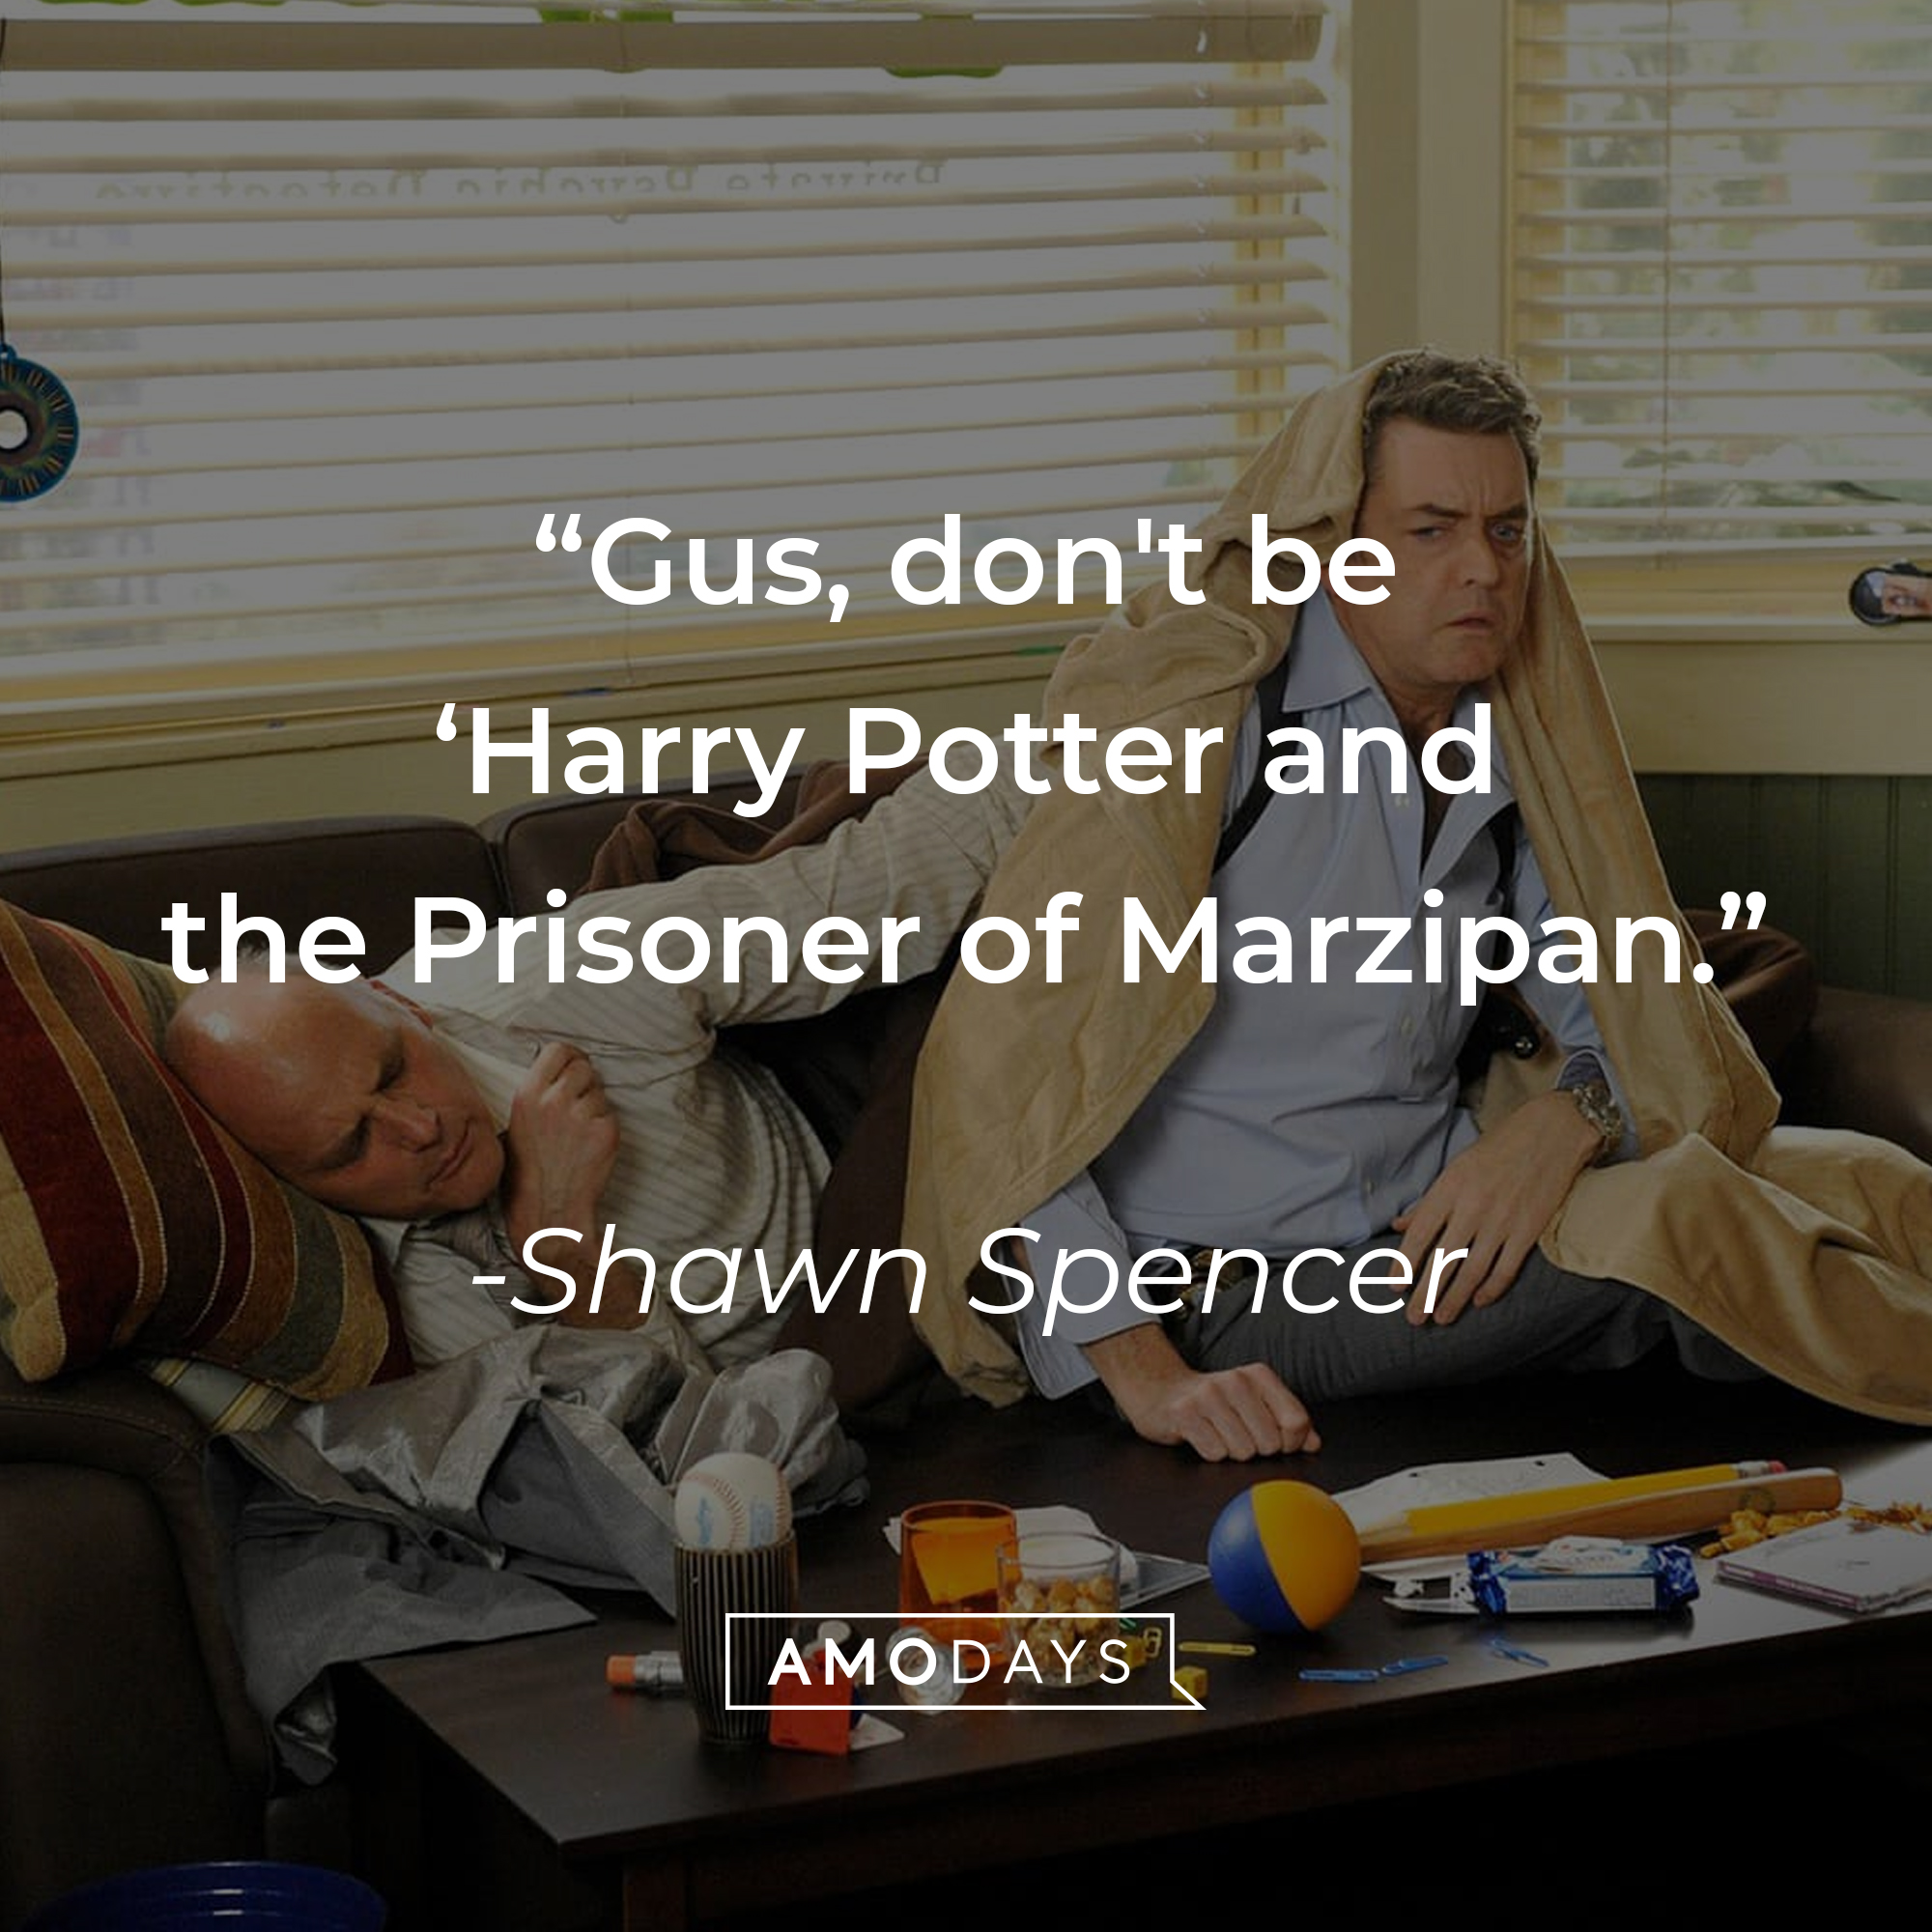 Two characters from" Psyche", with  Shawn Spencer’s quote:“Gus, don't be ‘Harry Potter and the Prisoner of Marzipan.’”  | Source: facebook.com/PsychPeacock